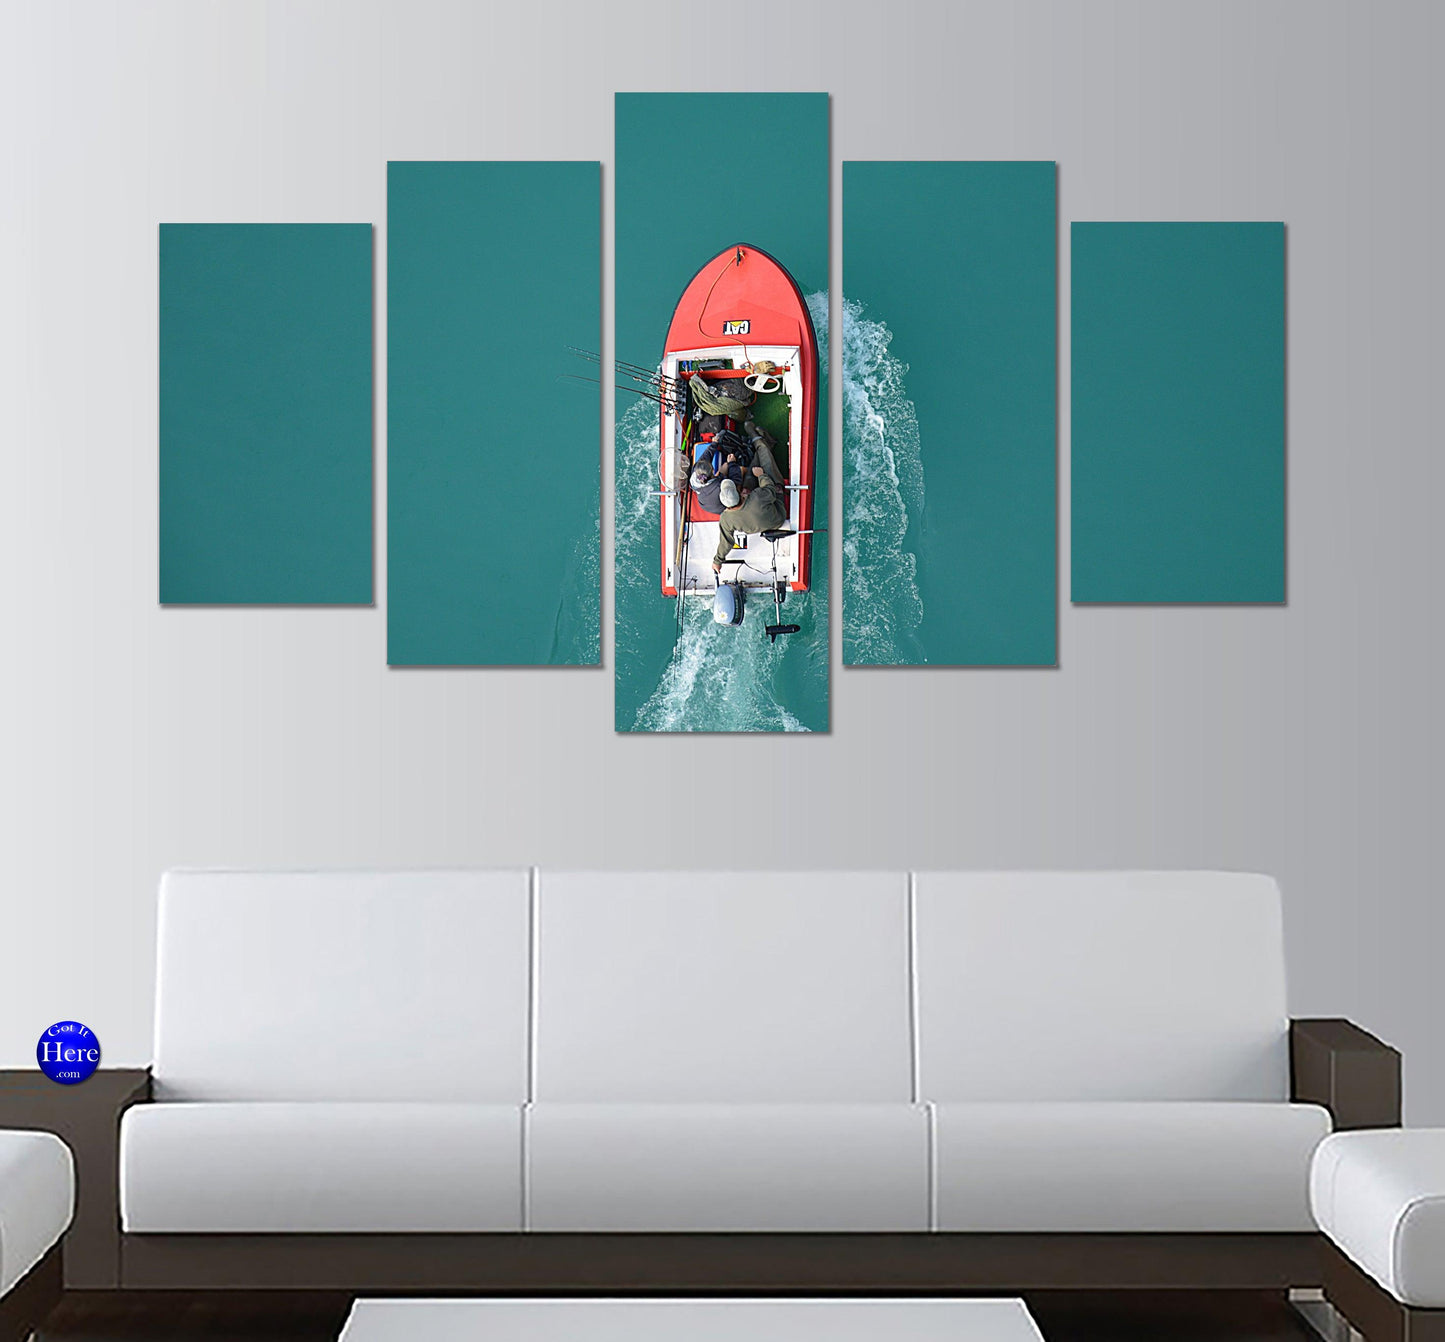 Aerial View of Fisherman on Boat 5 Panel Canvas Print Wall Art - GotItHere.com